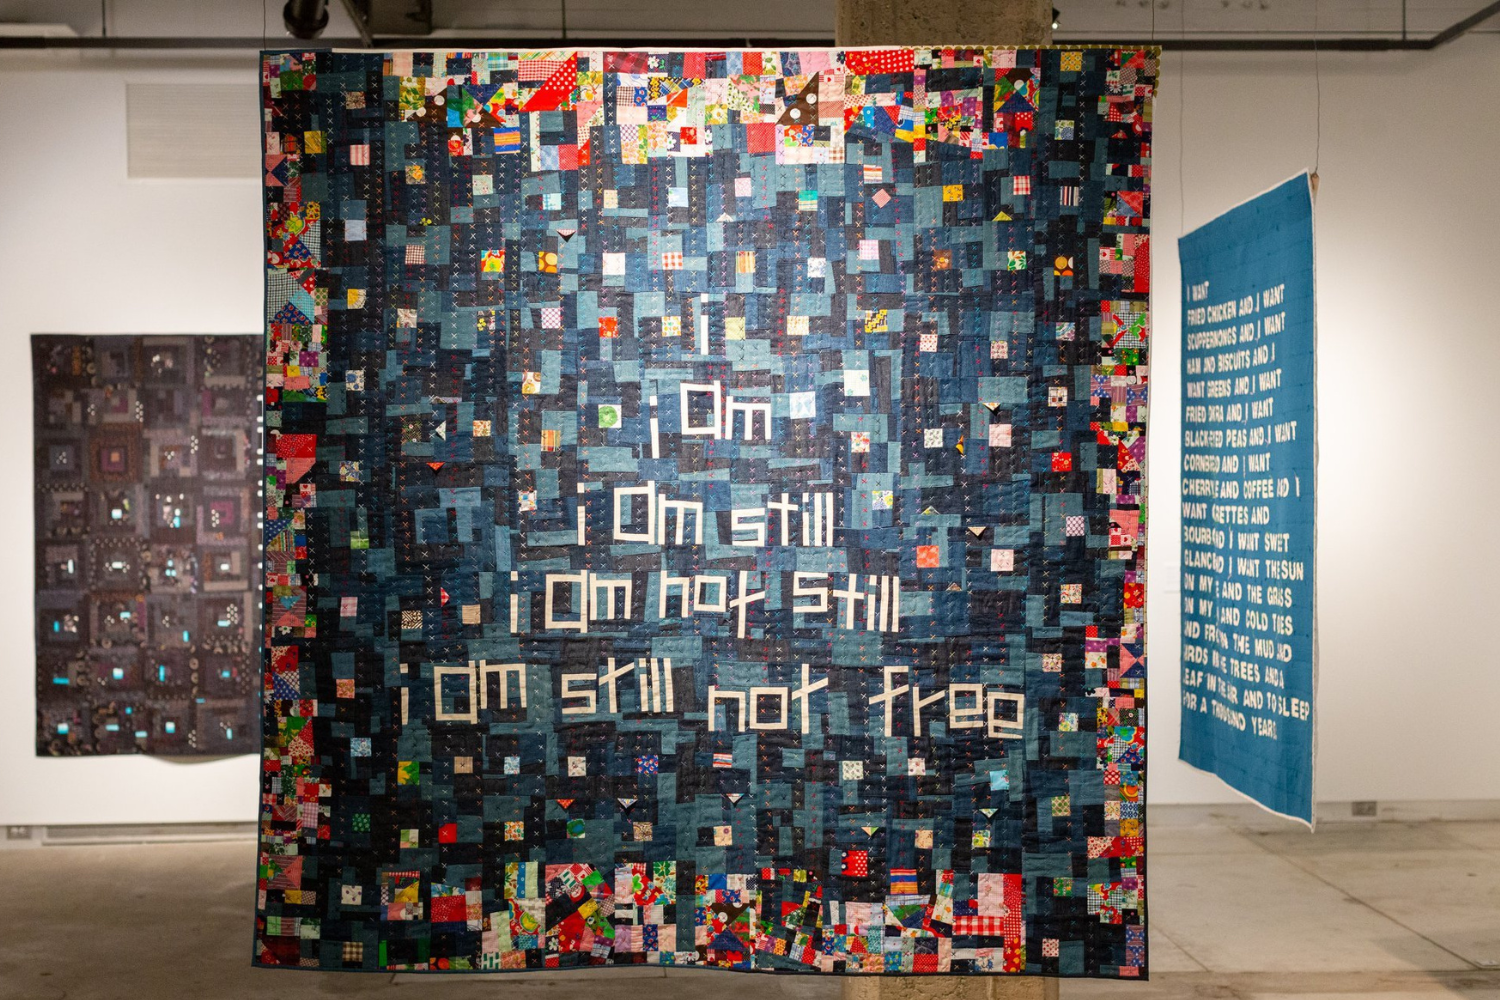 Photo of a quilt displayed from the ceiling in a gallery. A blue quilt with white all caps text is to the right and a quilt with a black background and rows of small patchwork squares in mostly dark fabric is behind and to the left. The main quilt has lowercase text in white fabric that reads “i am / i am still / i am not still / i am still not free.” Behind that text are small blocks made out of fabric that is black and various shades of blue with a few brightly colored small blocks peppered throughout. The border of the quilt is comprised of small brightly colored blocks worked together to form a border.